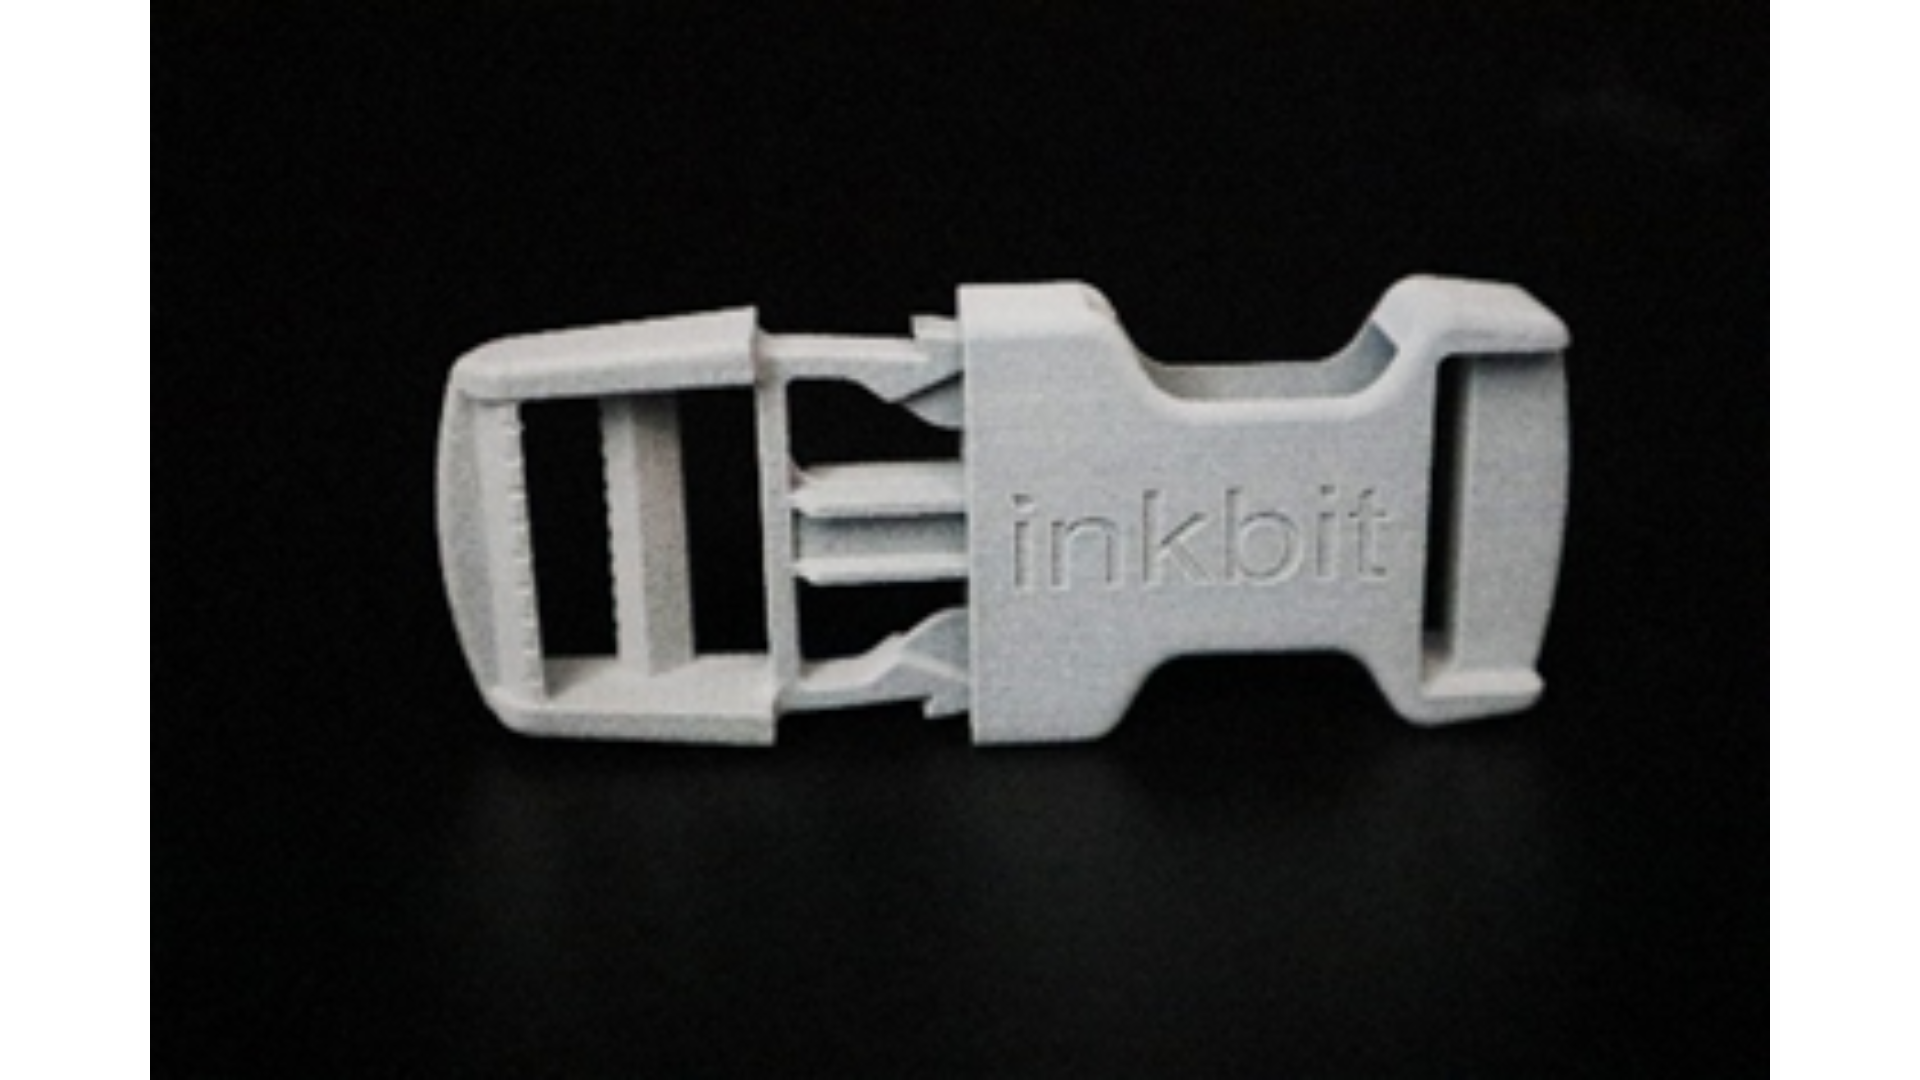 Inkbit unveiled Titan Tough Epoxy 85, its latest additive manufacturing material. Specially formulated for durability, this material delivers enhanced performance for applications that require both high accuracy and production-grade mechanical properties.